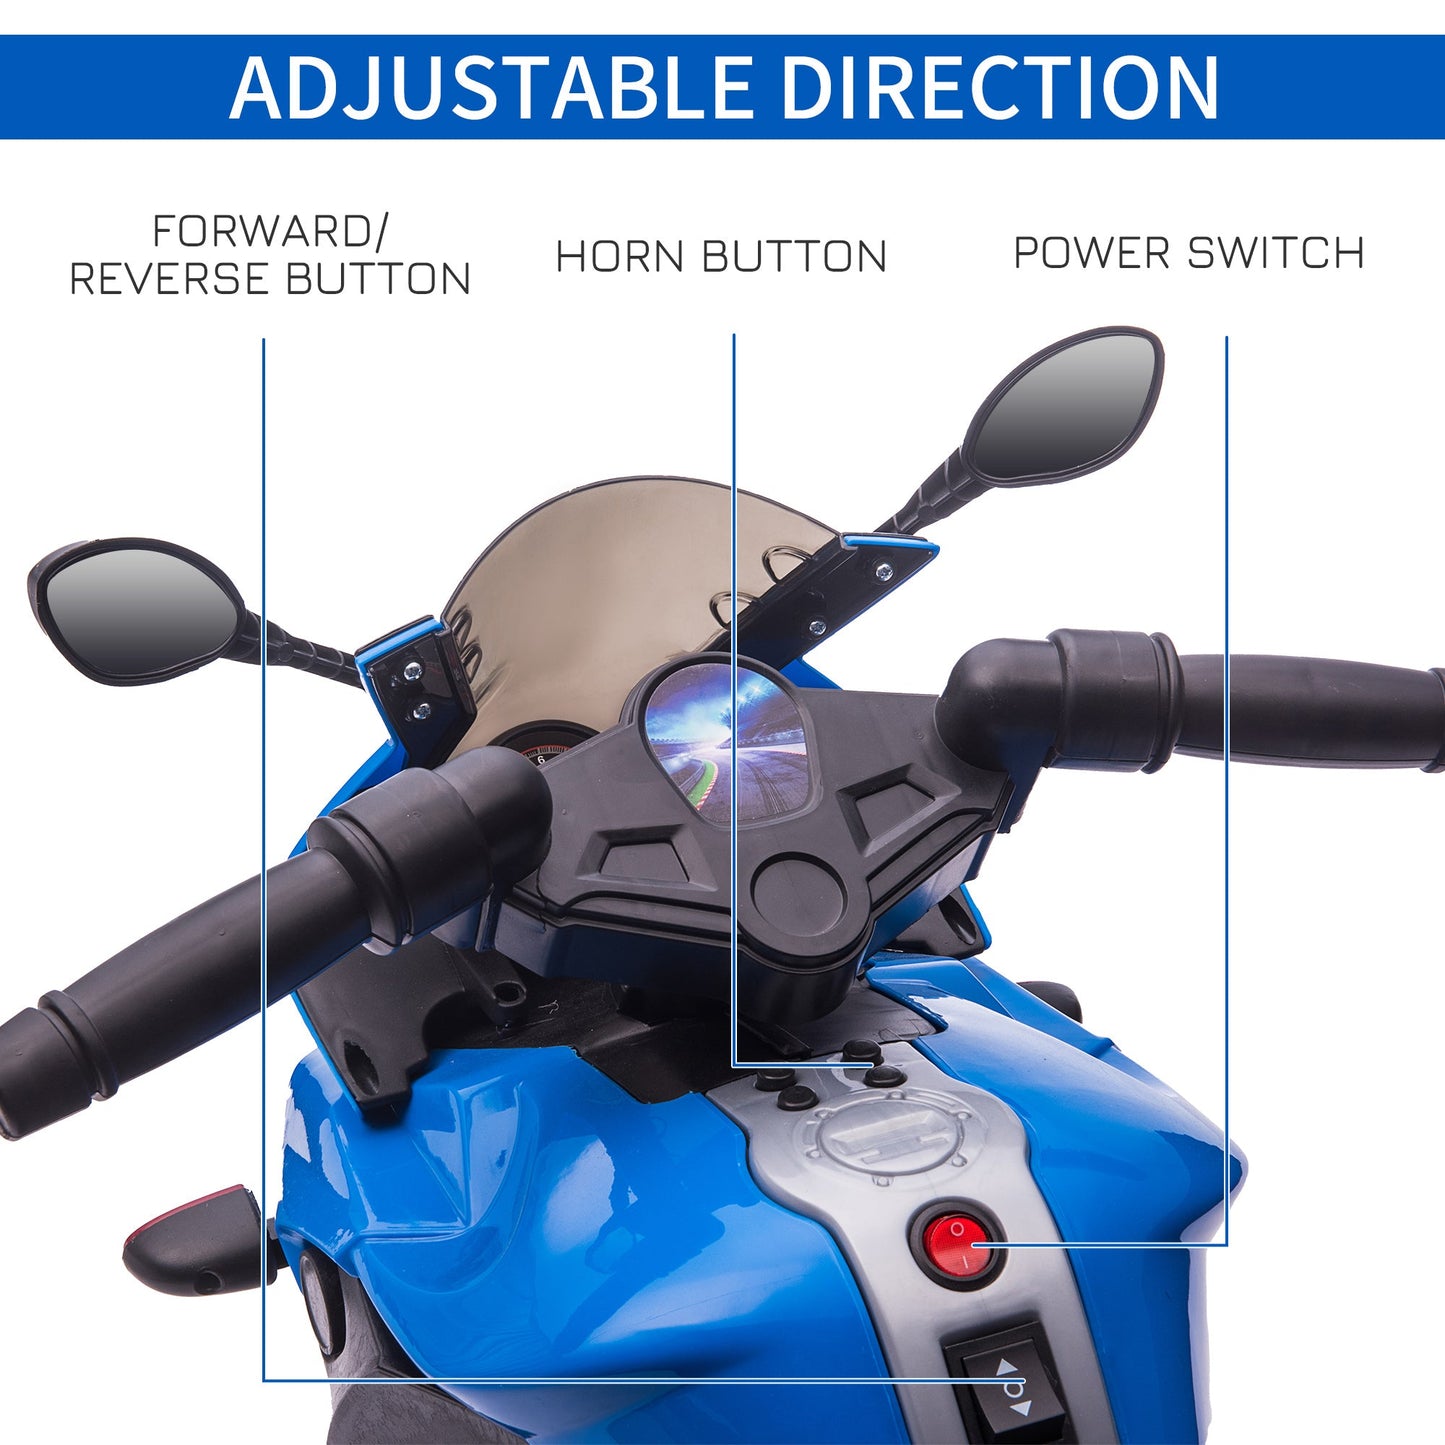 Toys and Games-6V Childs Electric Motorbike Battery-Powered Ride-On Toy Off-road Street Bike with Pedal, Horn, Headlights & Wheels, Blue - Outdoor Style Company